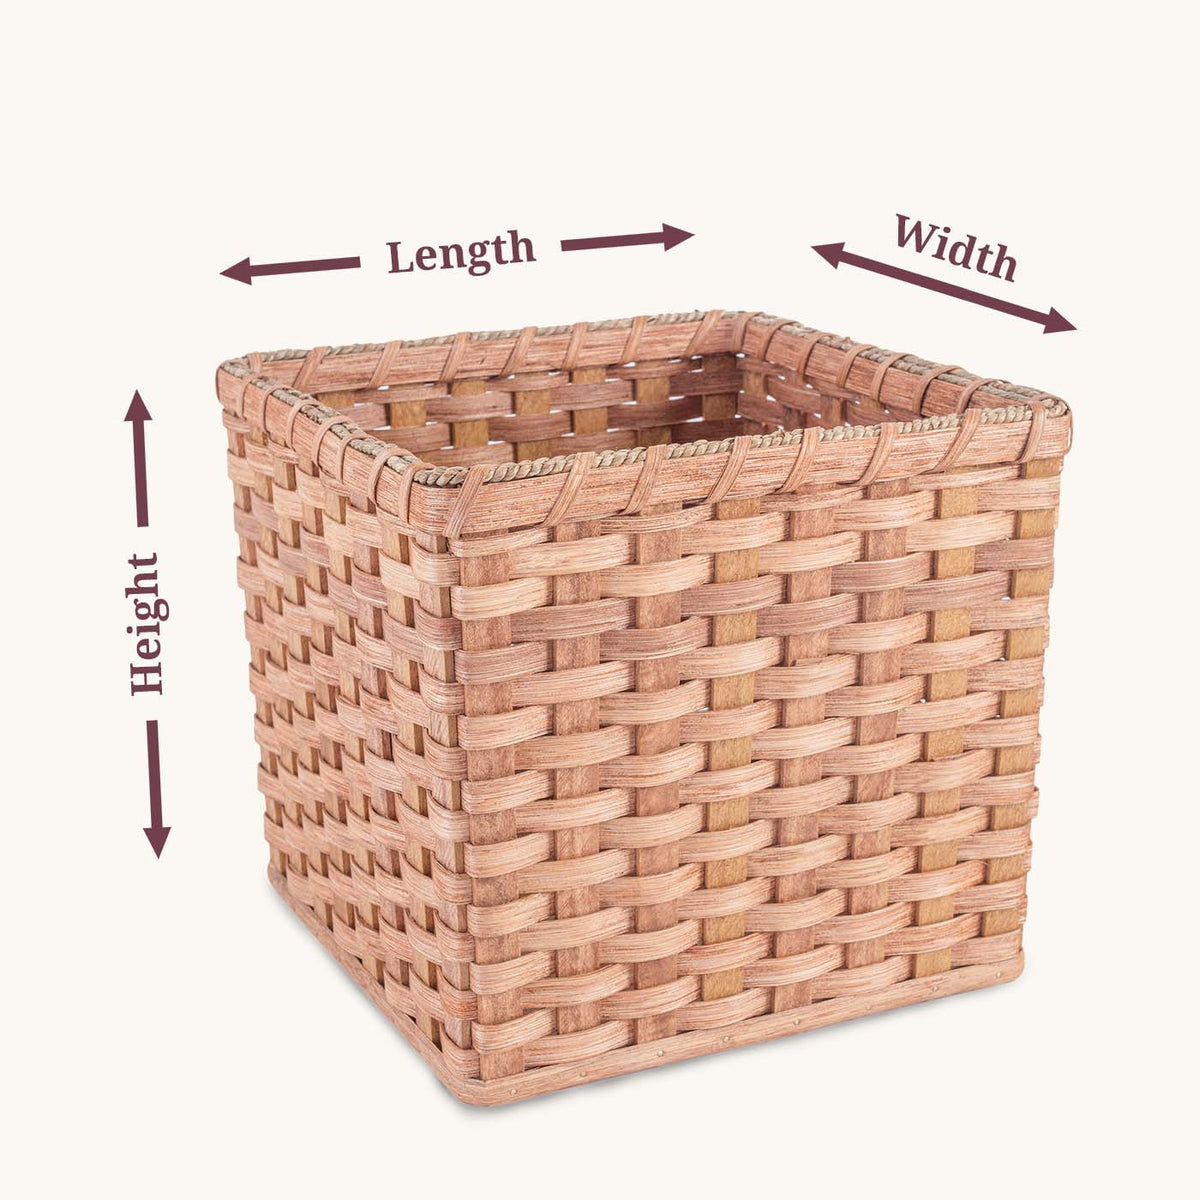 DIY IDEA: Woven leather storage baskets - homes+ 